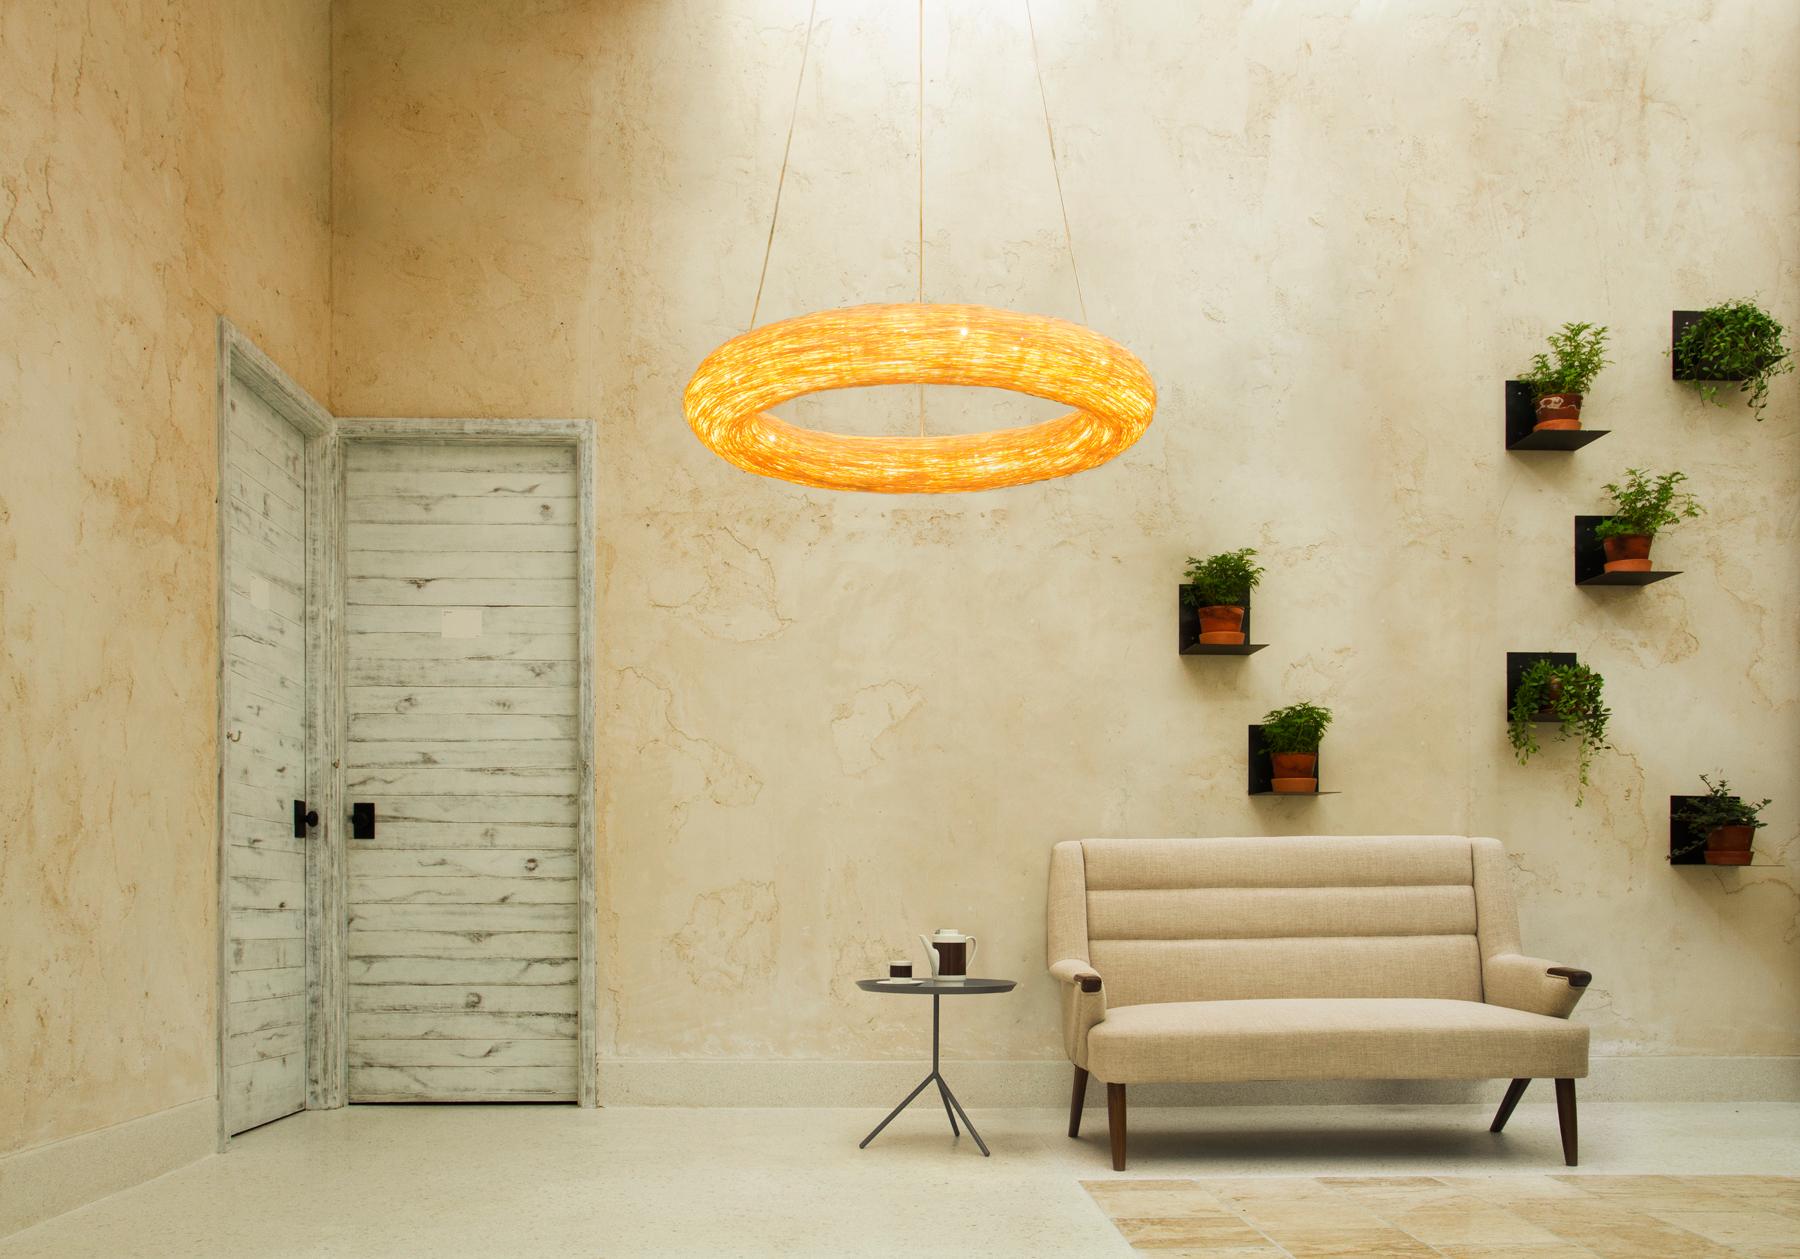 Thai Yellow Crown 1100 by Ango, Hand-Woven Pendant Light in a Timeless Circular Form For Sale